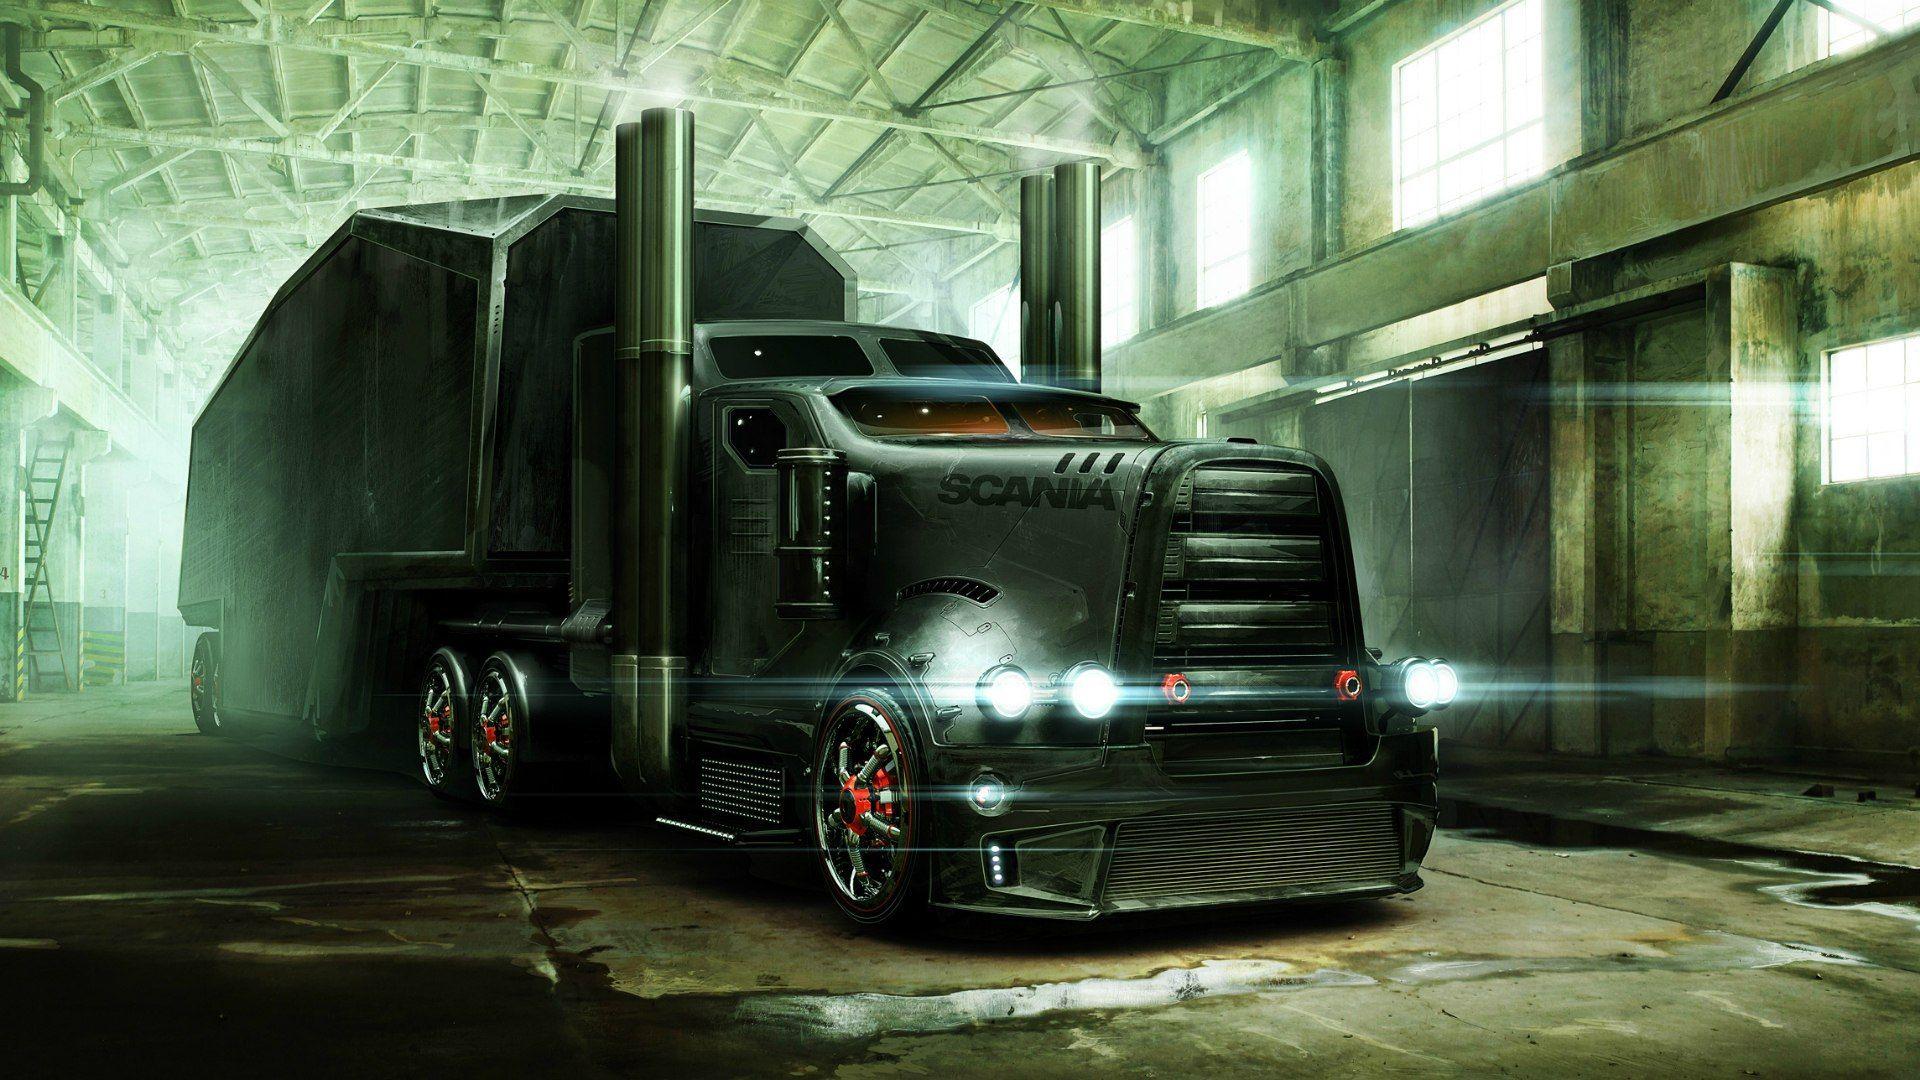 Was searching for a cool truck wallpaper and came across this beaut